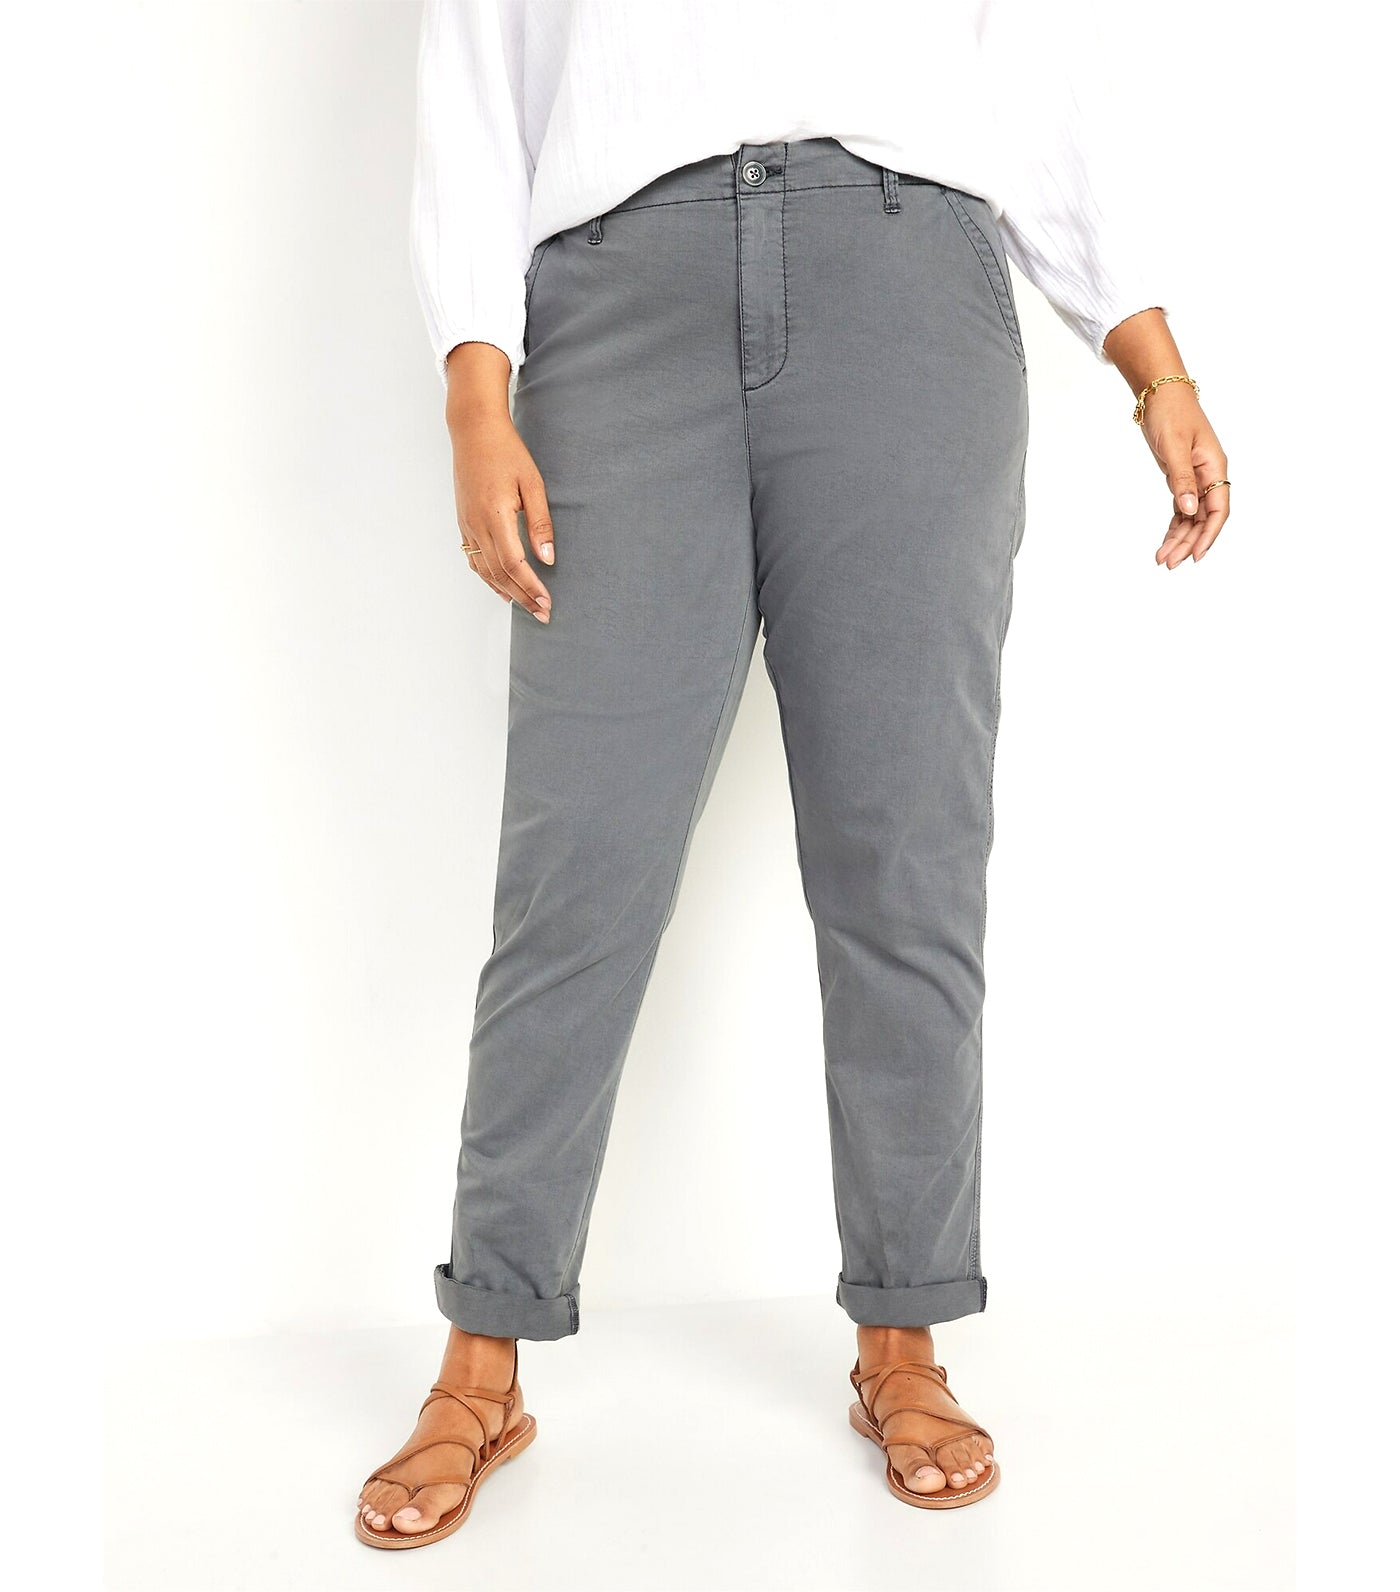 Old Navy High-Waisted OGC Chino Pants for Women